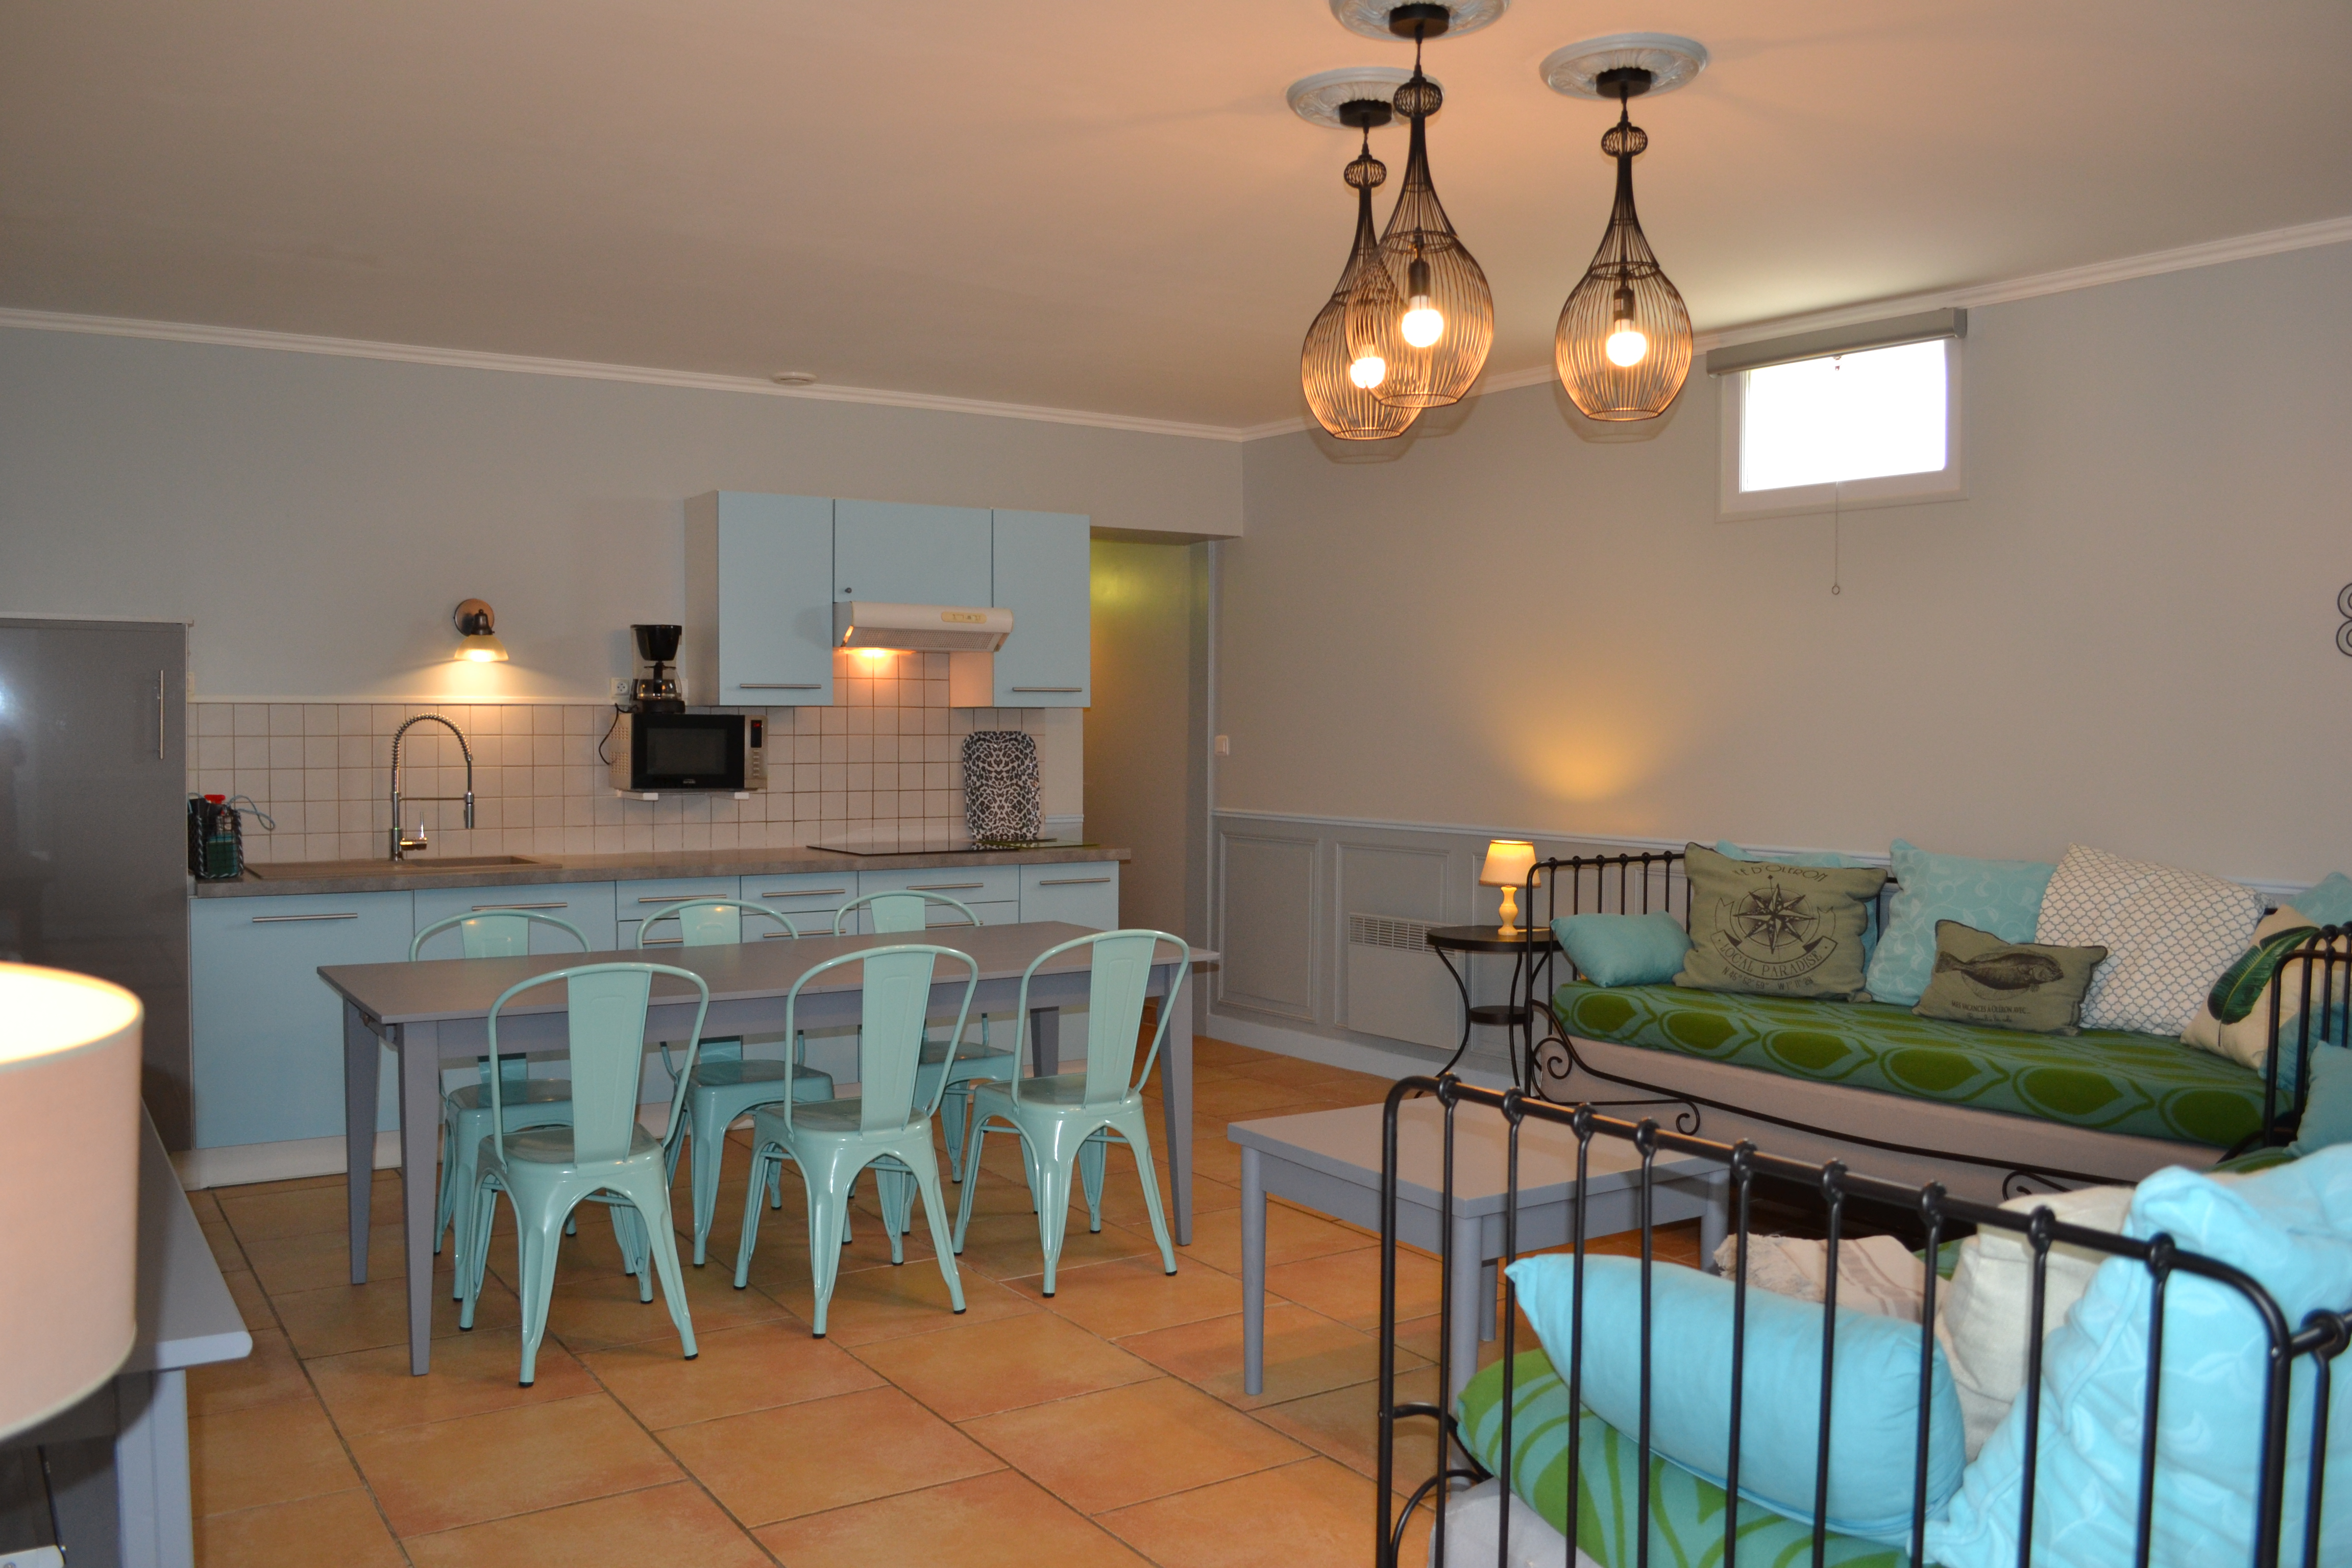 The Patelle suite-apartment with kitchen and terrace - Atlantic Hotel - Oléron Island - Charente Maritime near la Cotinière and Chassiron near the beach